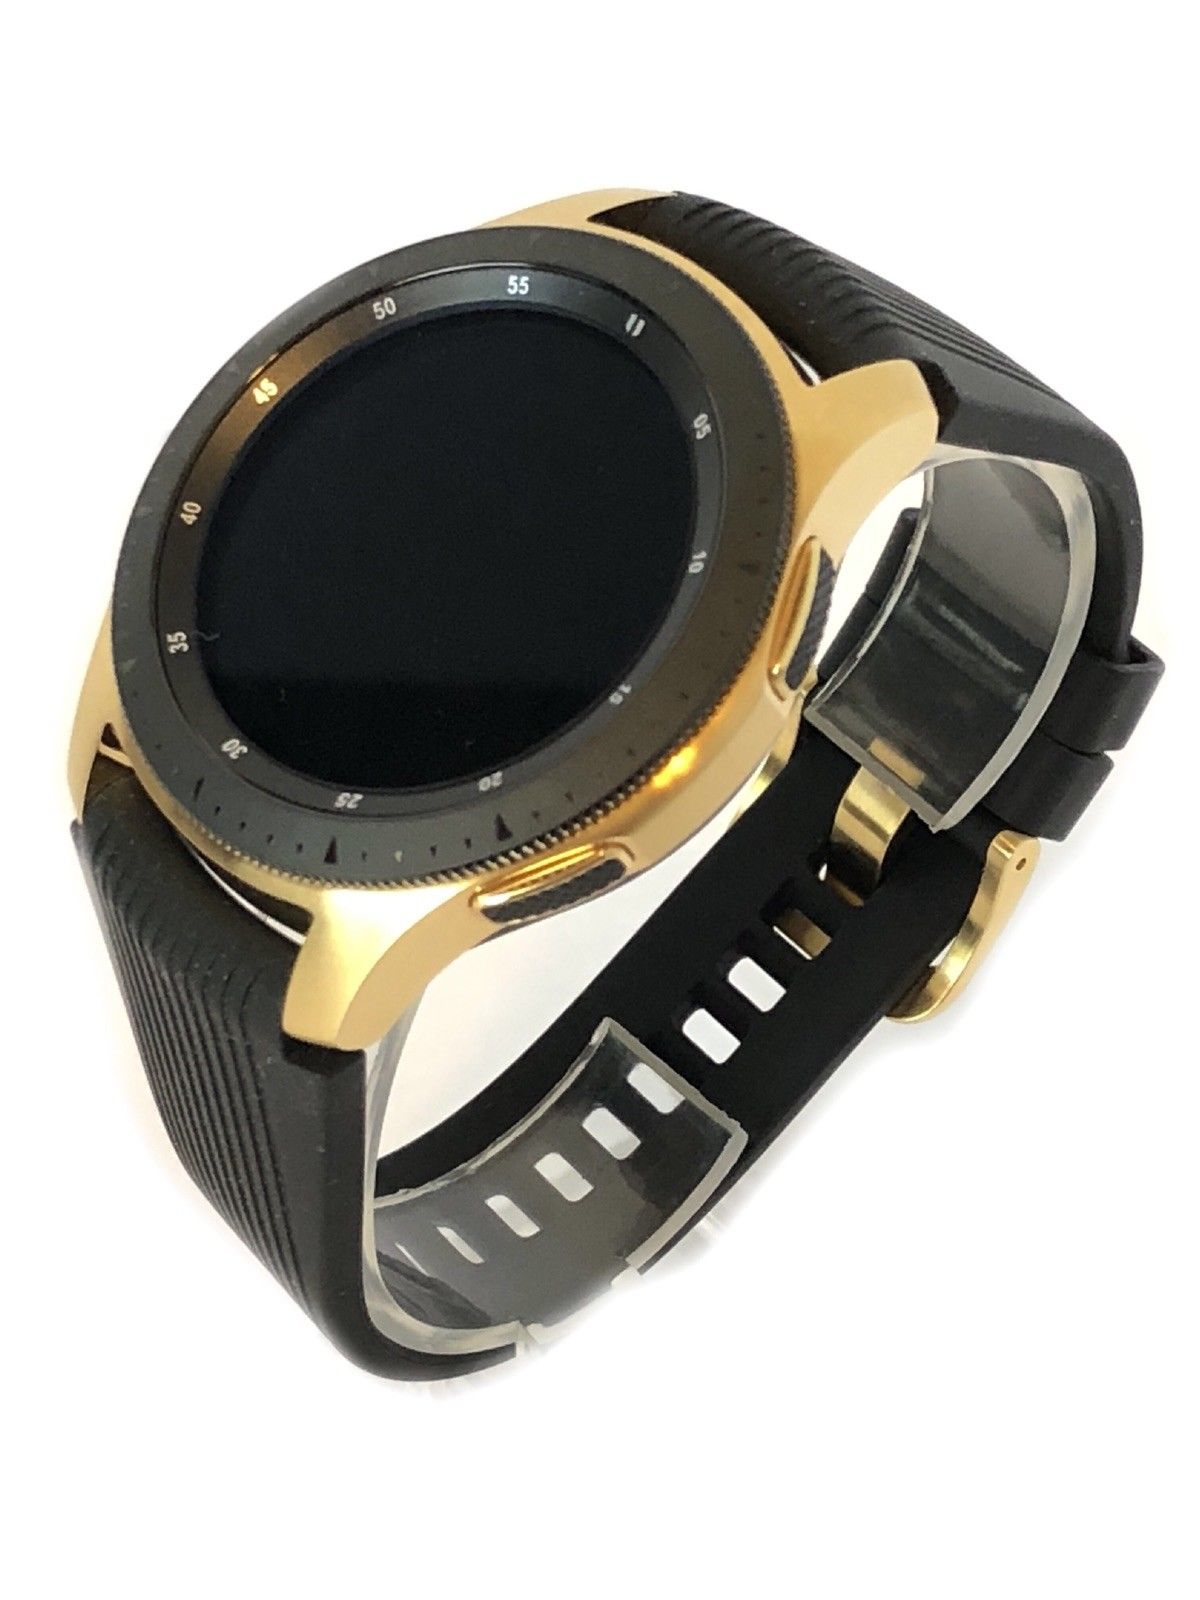 24K Gold Plated 46MM 2018 Samsung Galaxy Watch Black Band - image 1 of 2